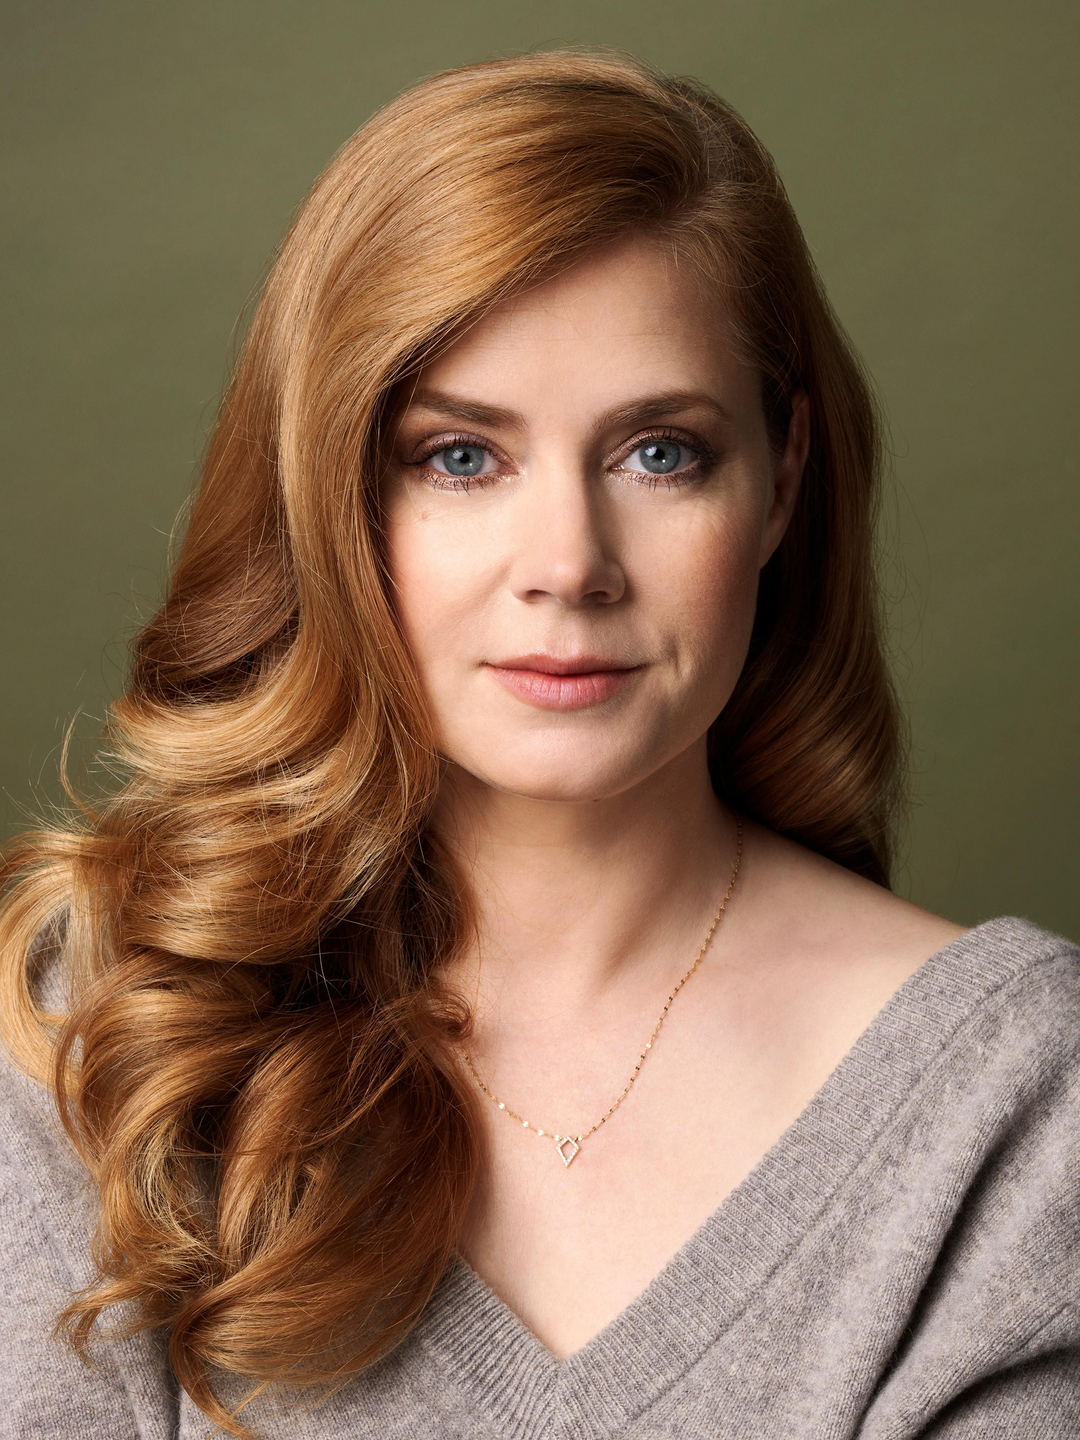 Amy Adams young age